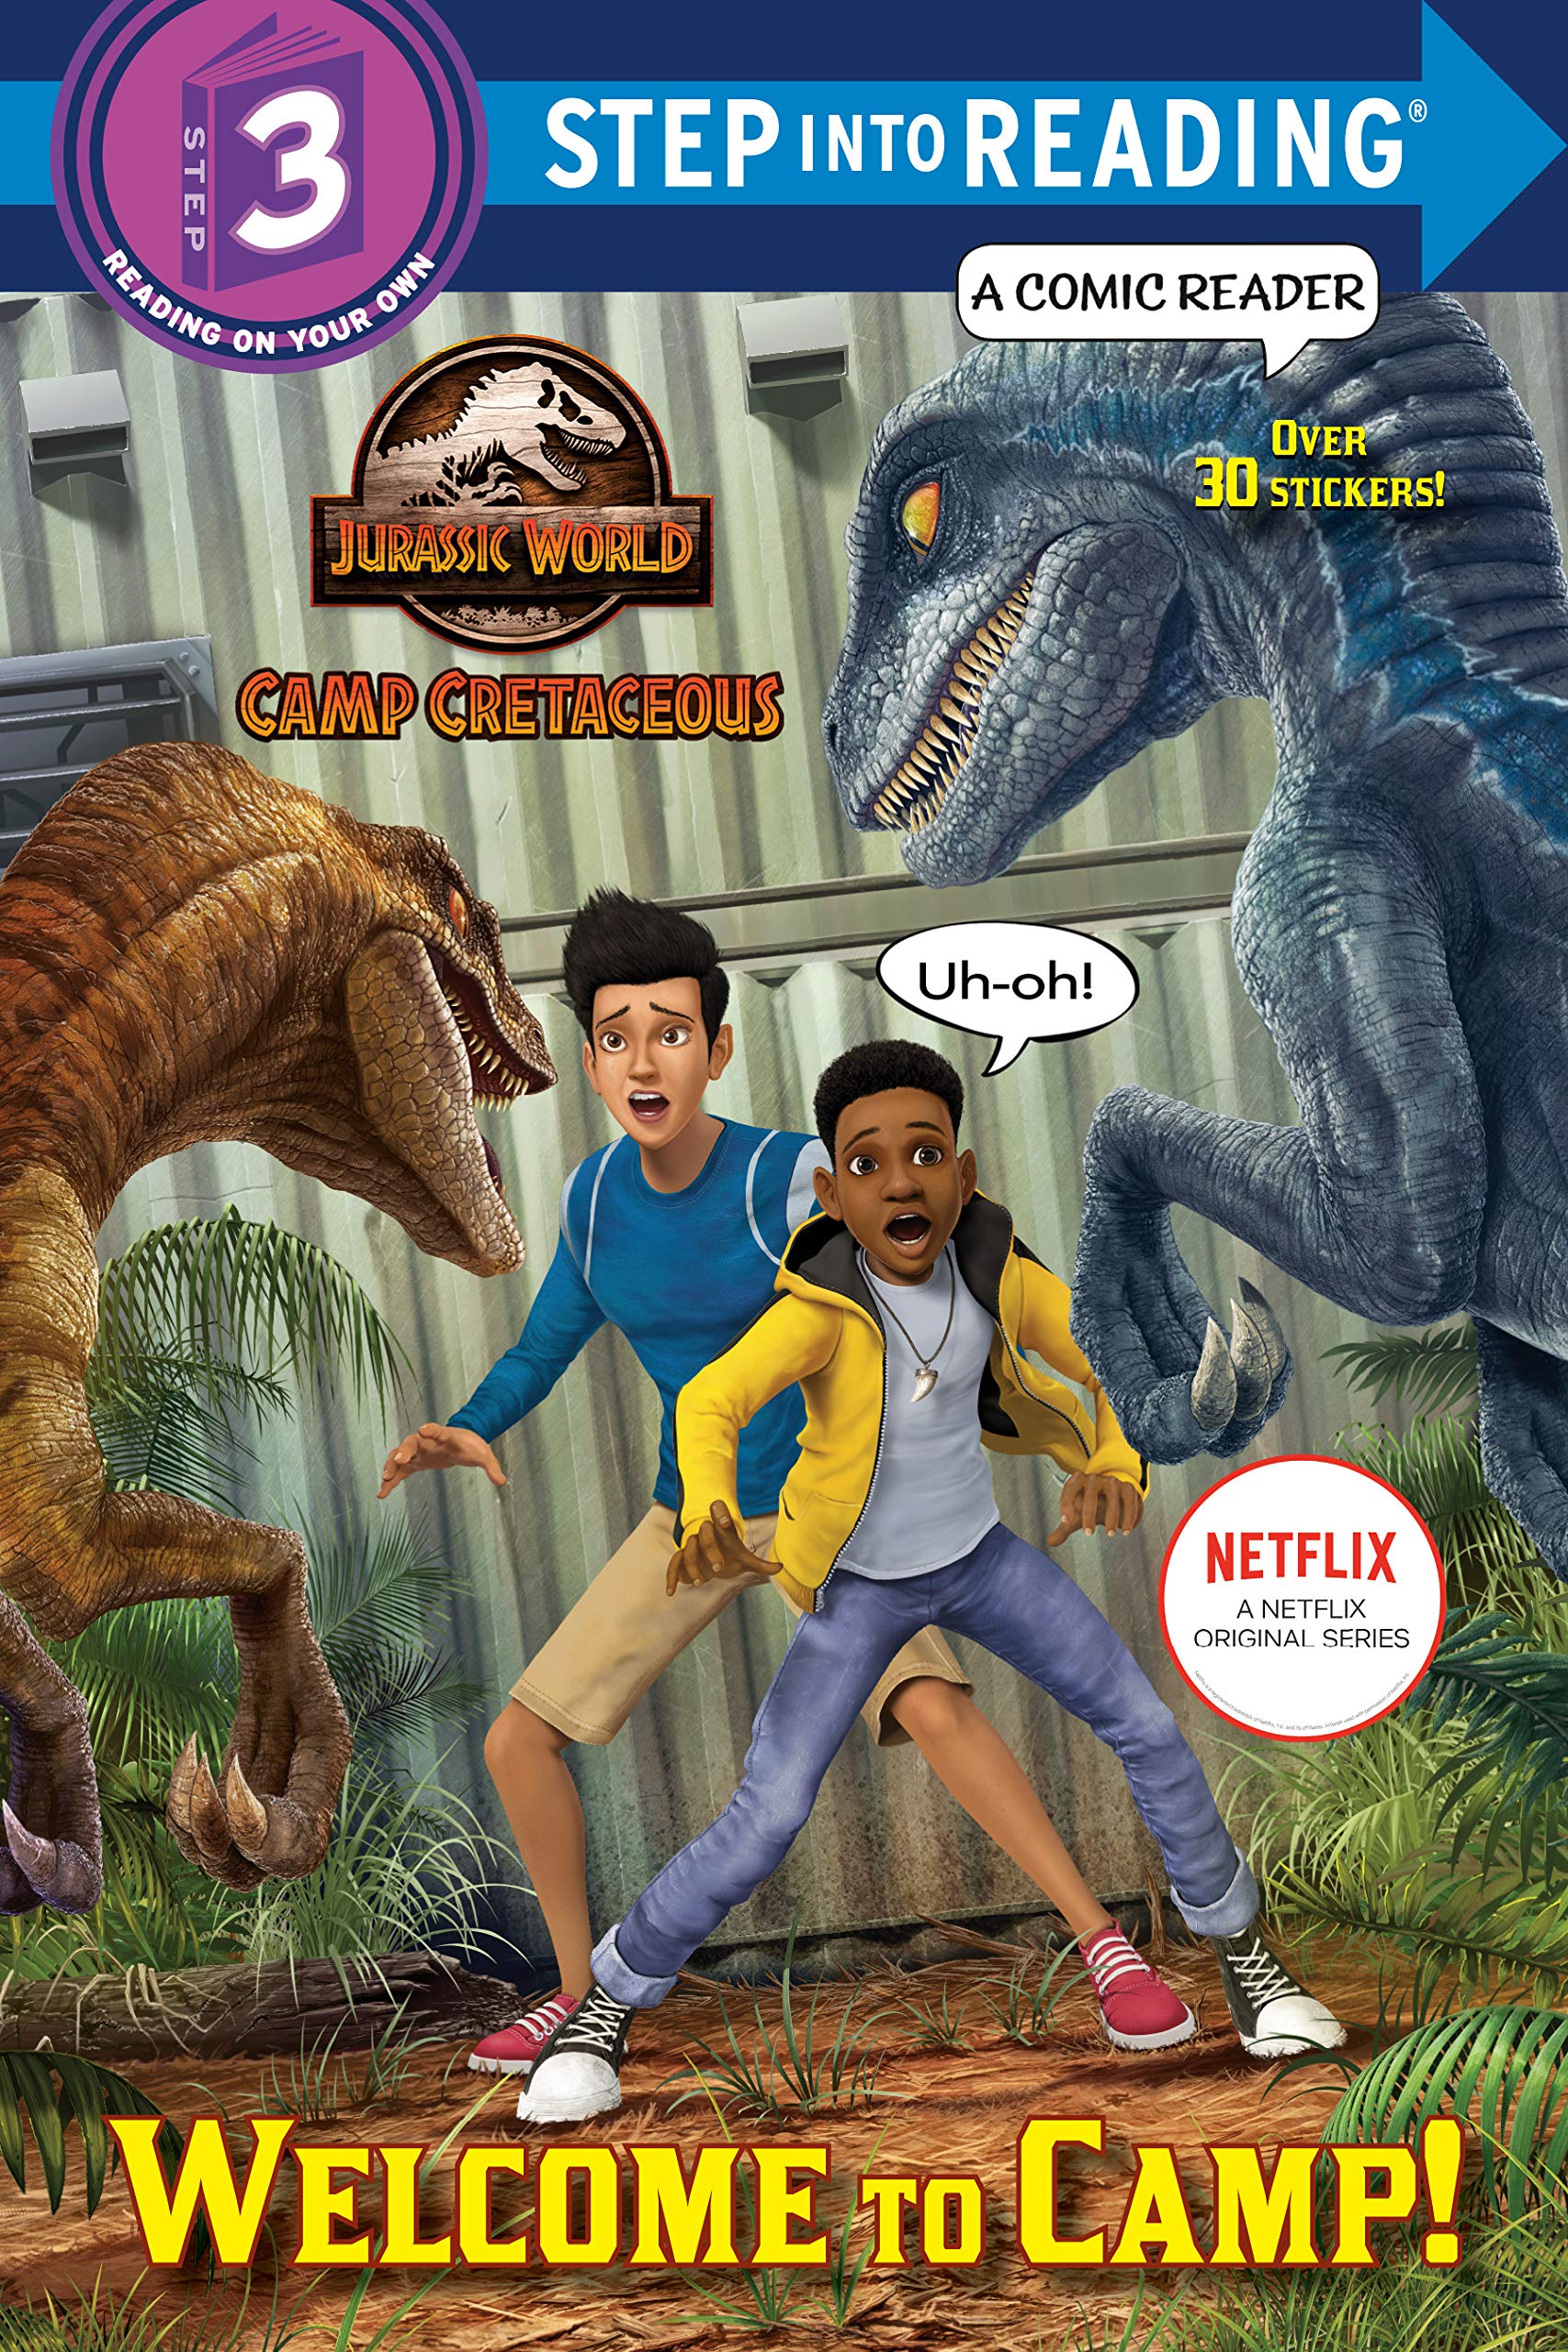 Welcome to Camp! (Jurassic World: Camp Cretaceous) (Step into Reading): Behling, Steve, Spaziante, Patrick: 9780593303351: Books